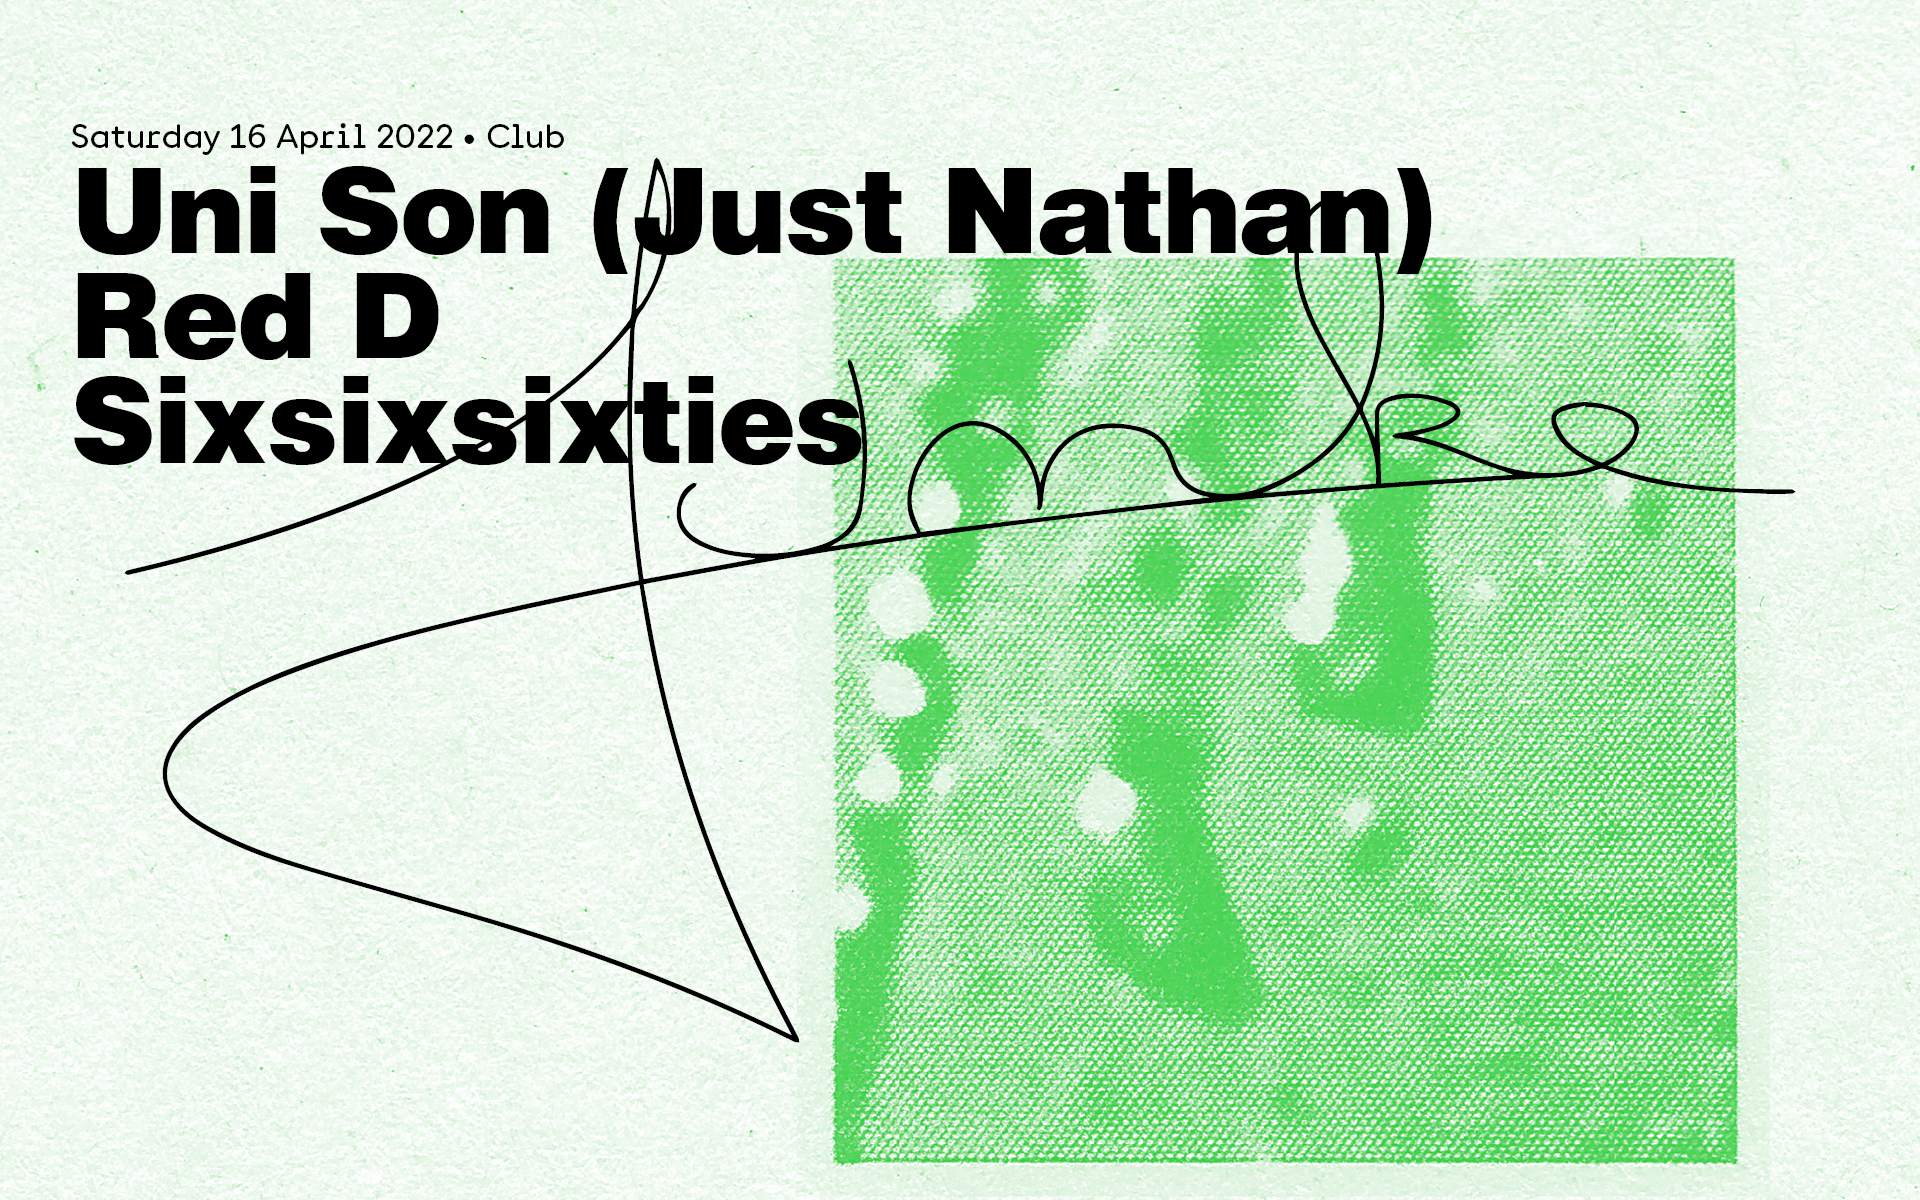 Funke w. Uni Son / Just Nathan, Red D, Sixsixsixties - フライヤー表